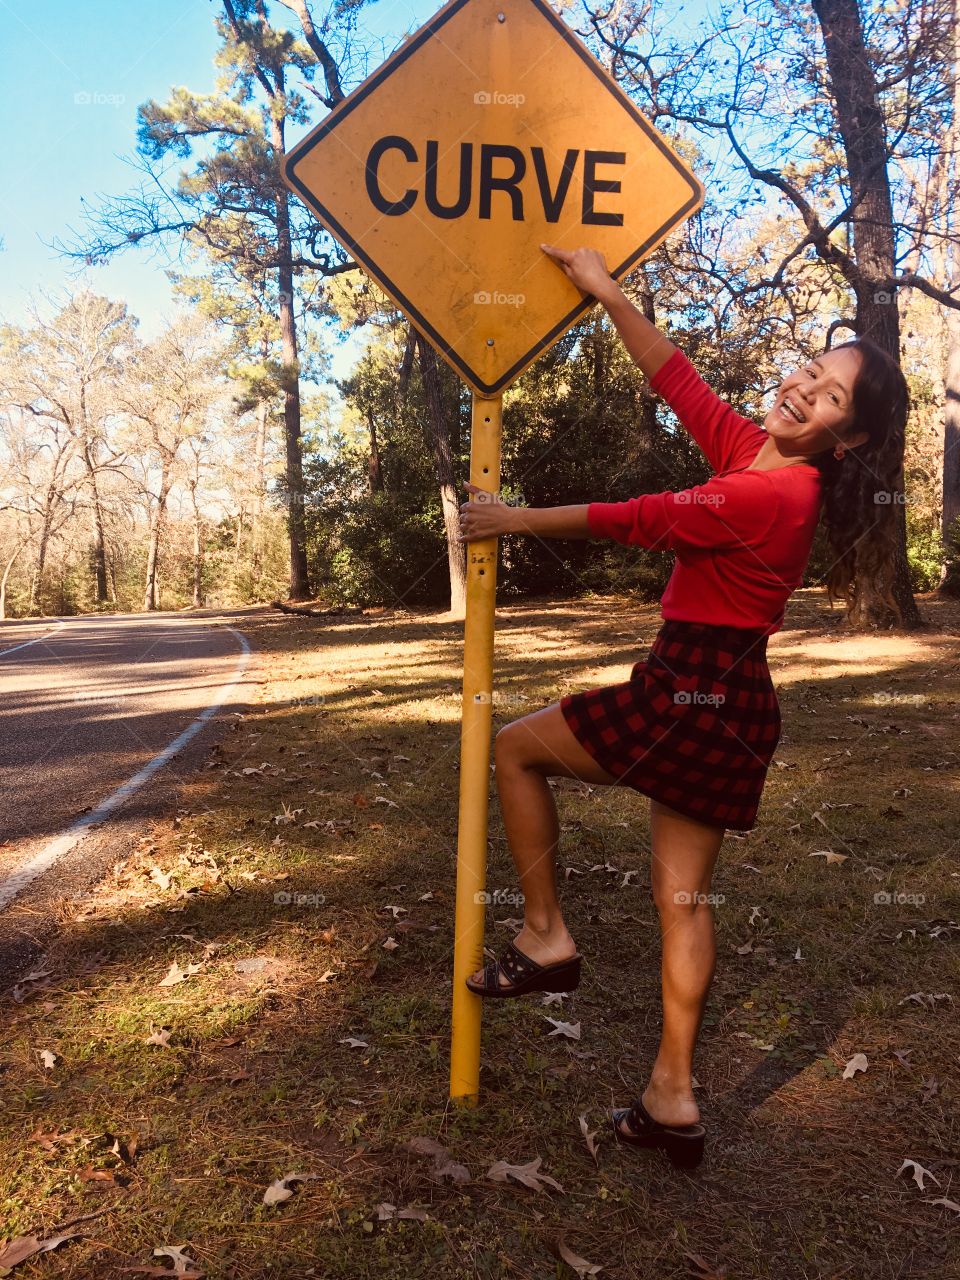 Curves on the road 